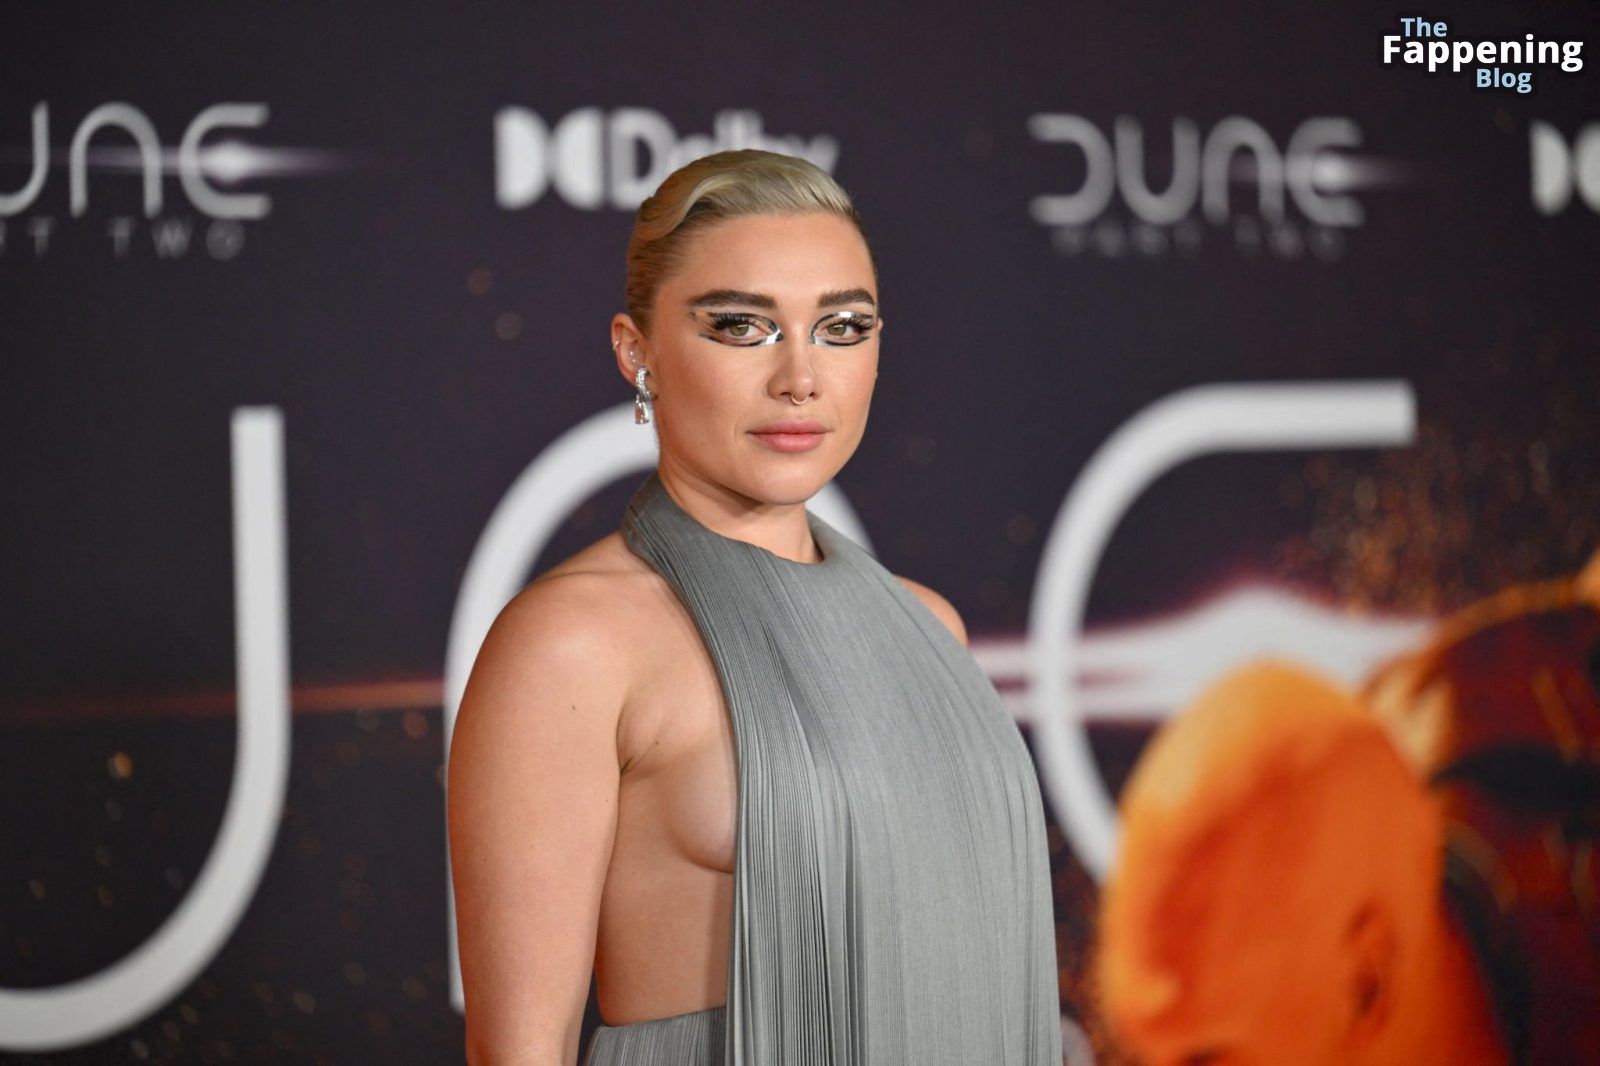 florence-pugh-braless-side-boobs-dune-part-two-premiere-nyc-21-thefappeningblog.com_.jpg